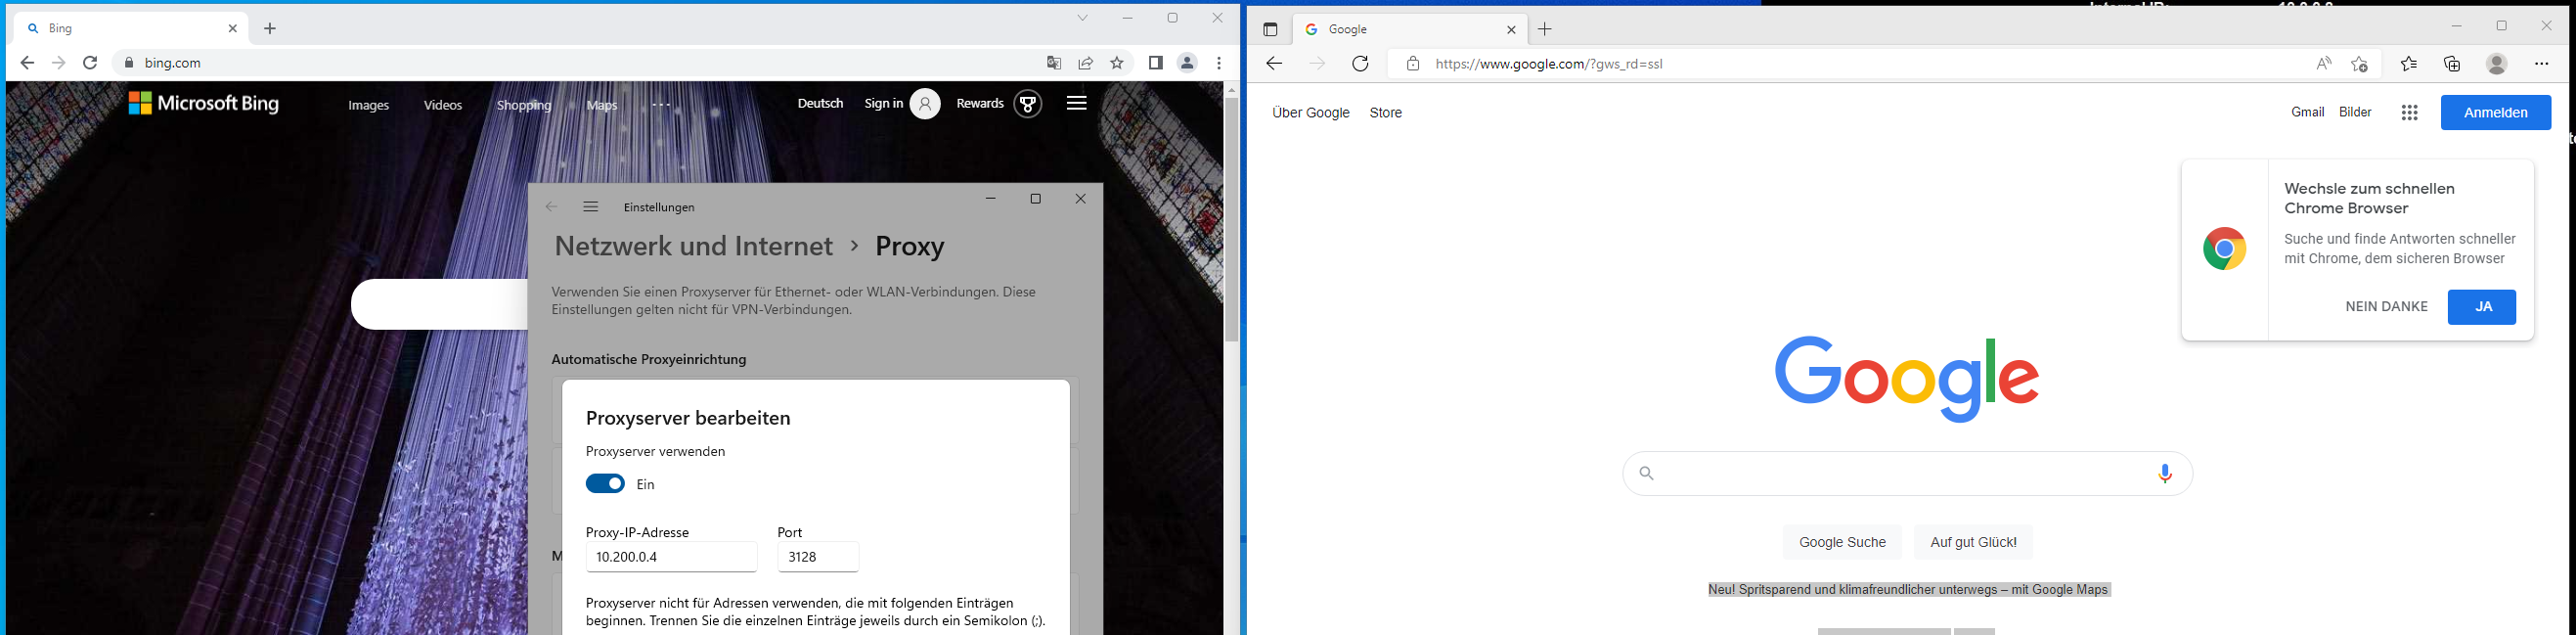 The challenge of having the correct language in the Edge browser with Azure Virtual Desktop in West Europe